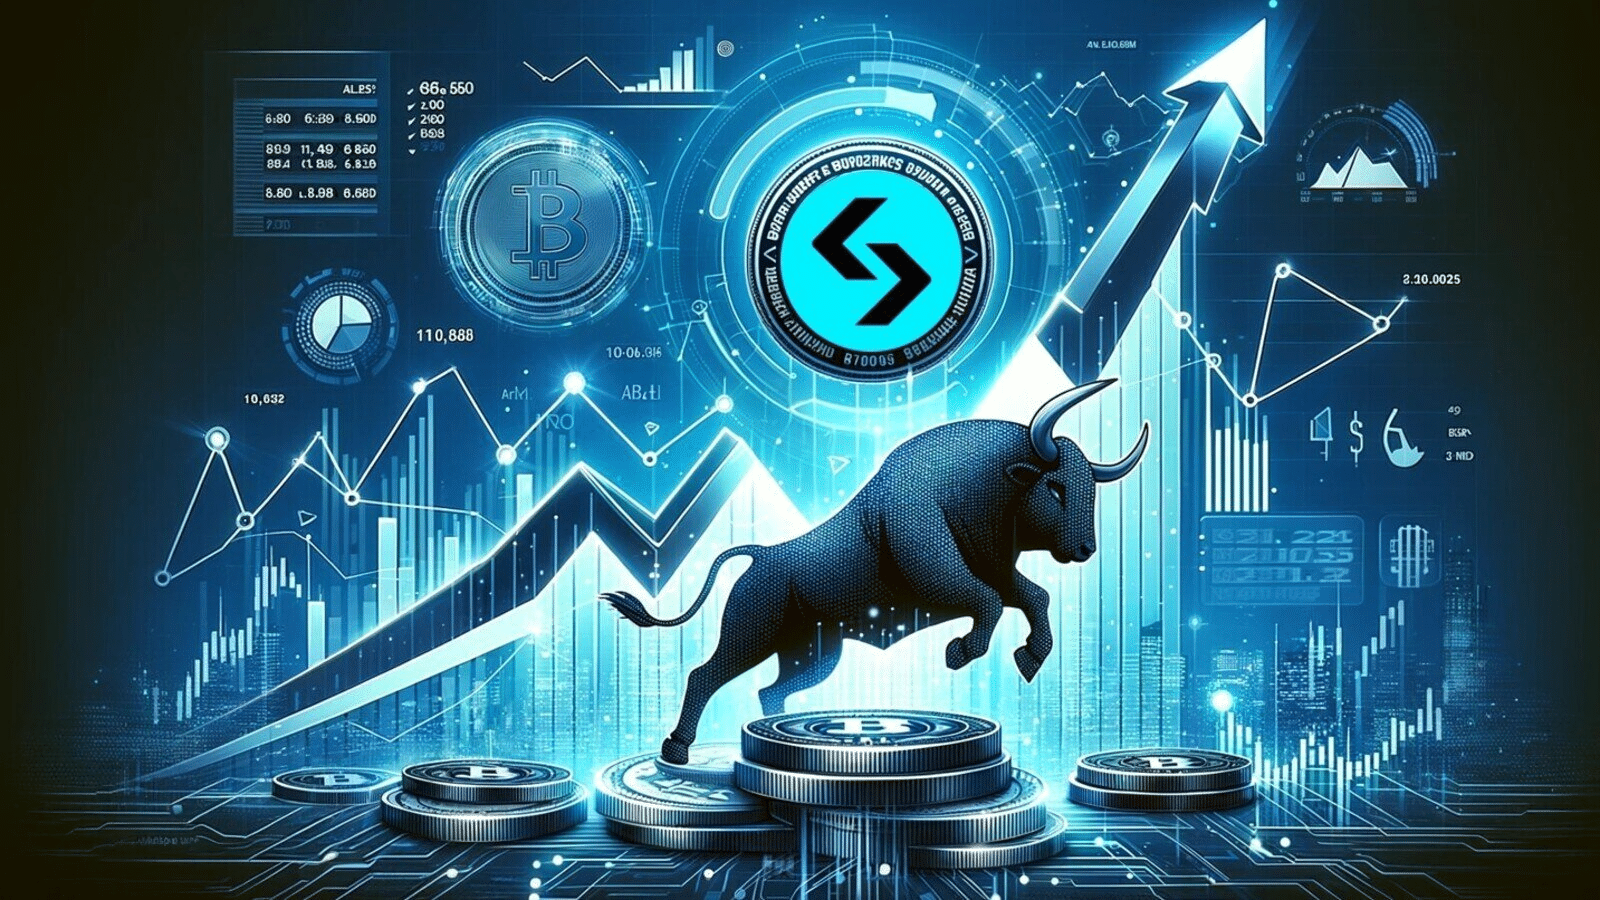 5 Best Altcoins to Invest in Right Now March 20 – Stacks, AIOZ Network, The Sandbox